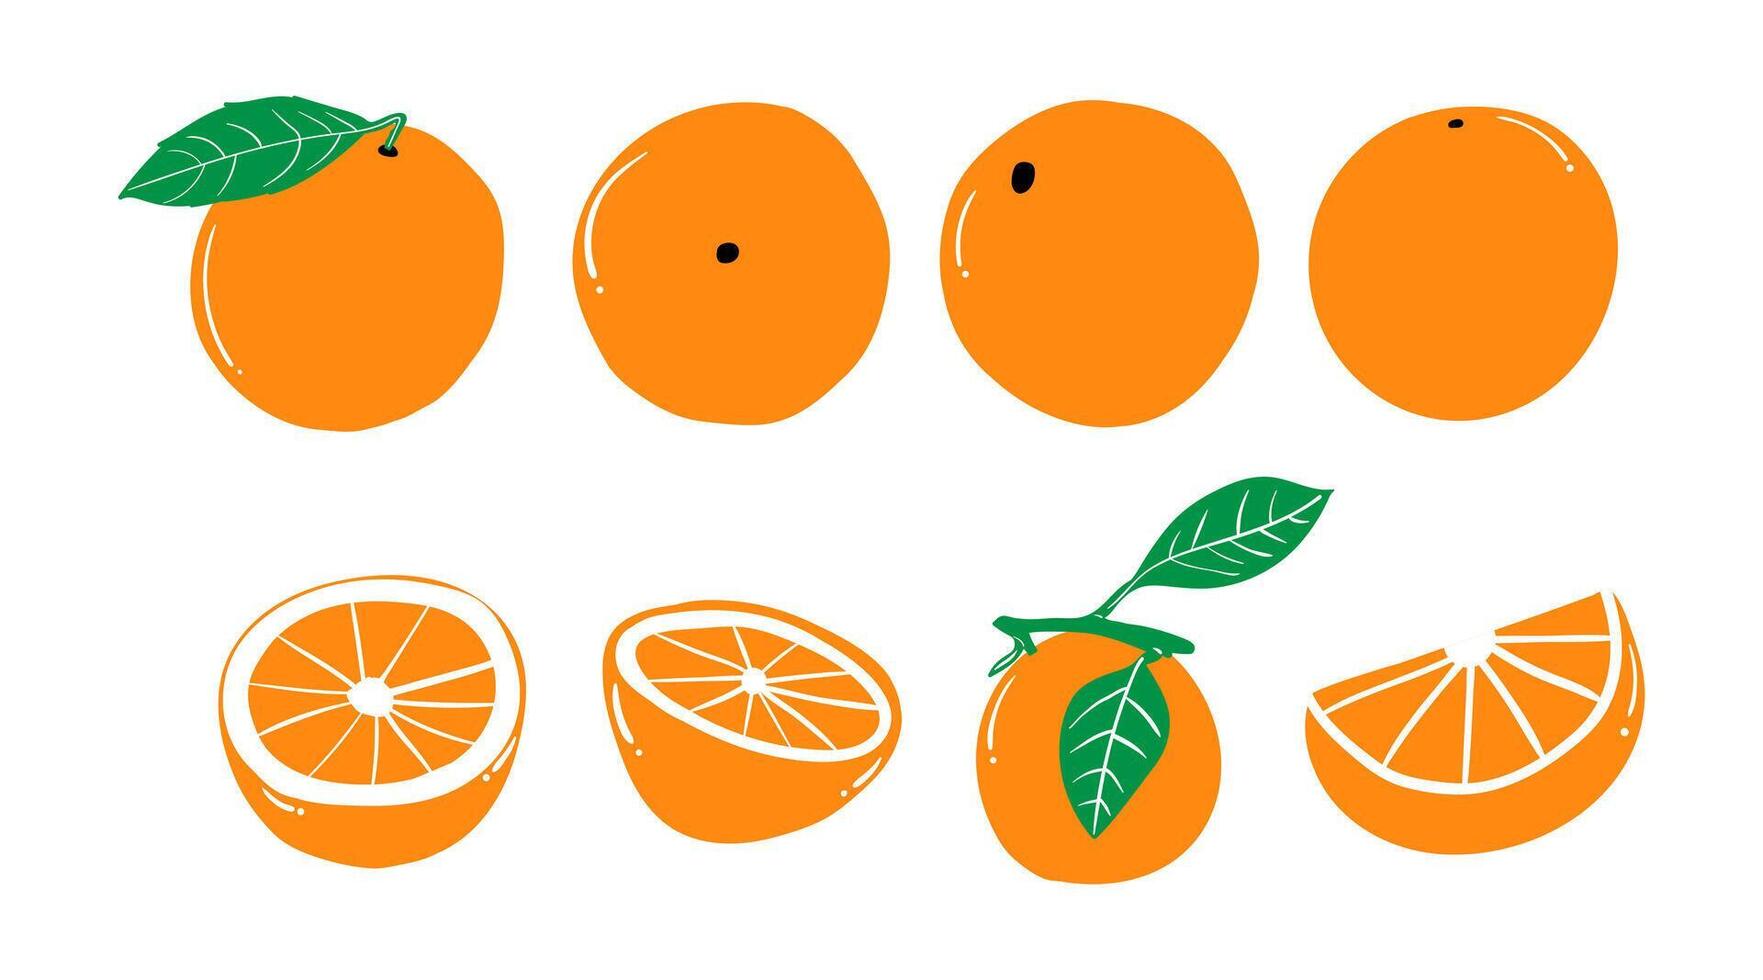 vector illustration of a collection of orange fruits